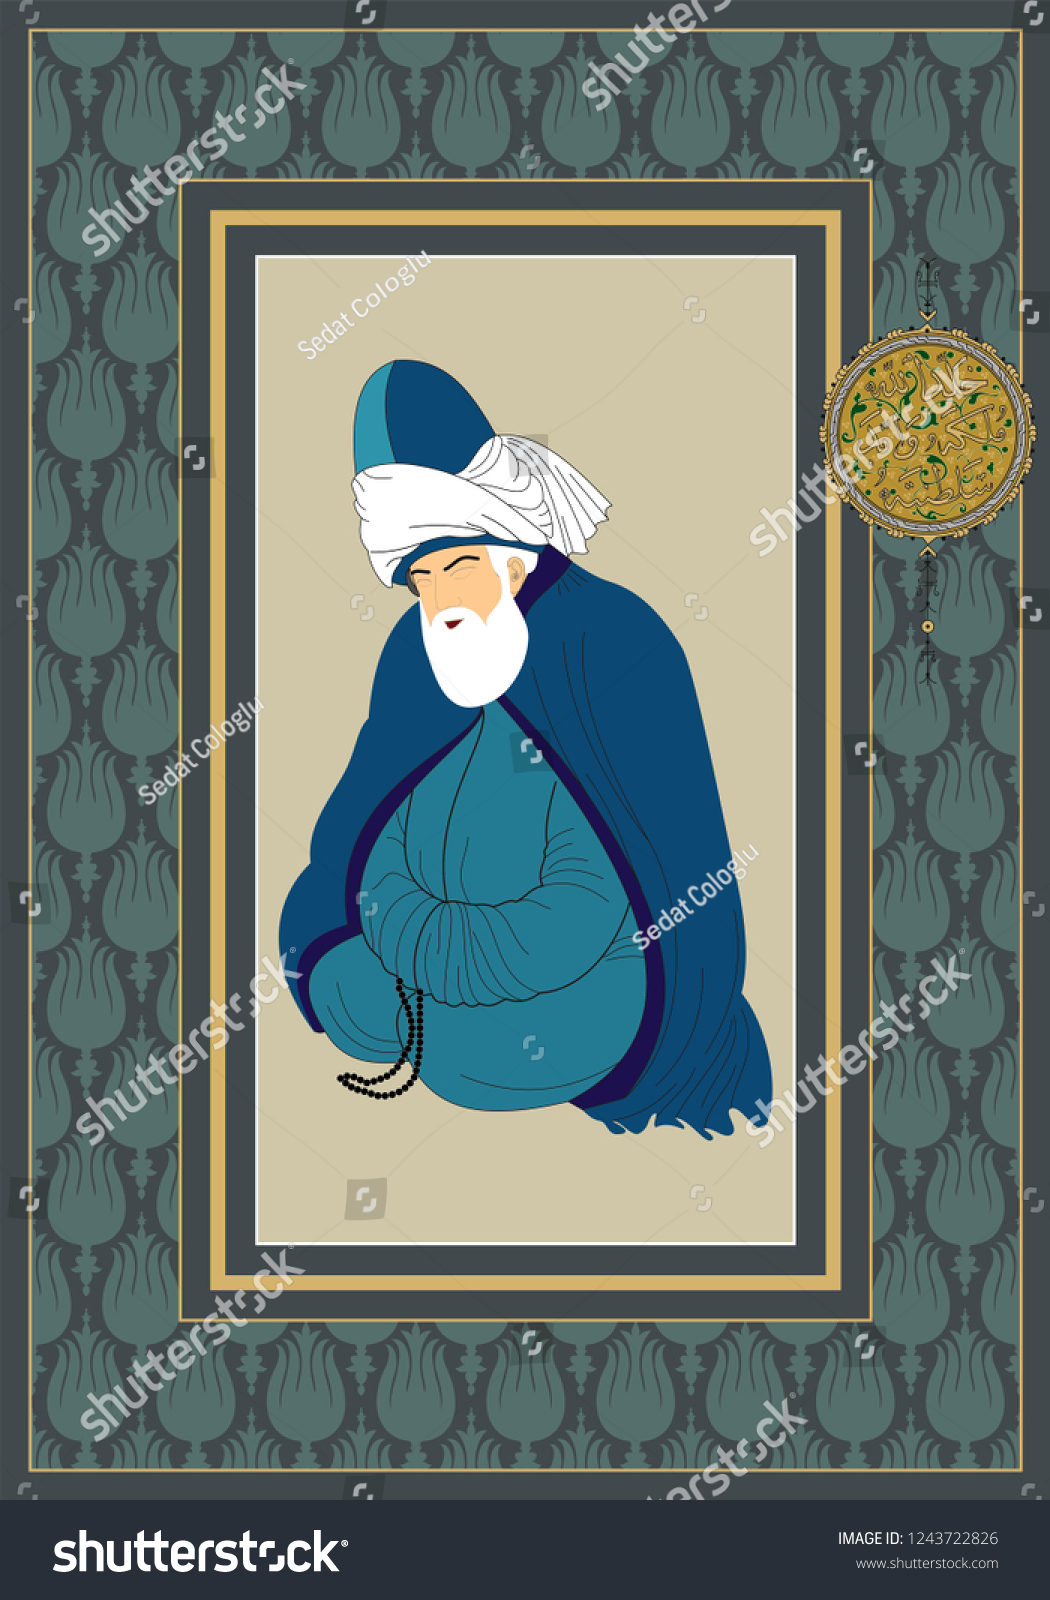 stock-vector-vector-hand-drawn-mevlana-poster-it-can-be-used-as-wall-decoration-table-gift-card-book-1243722826